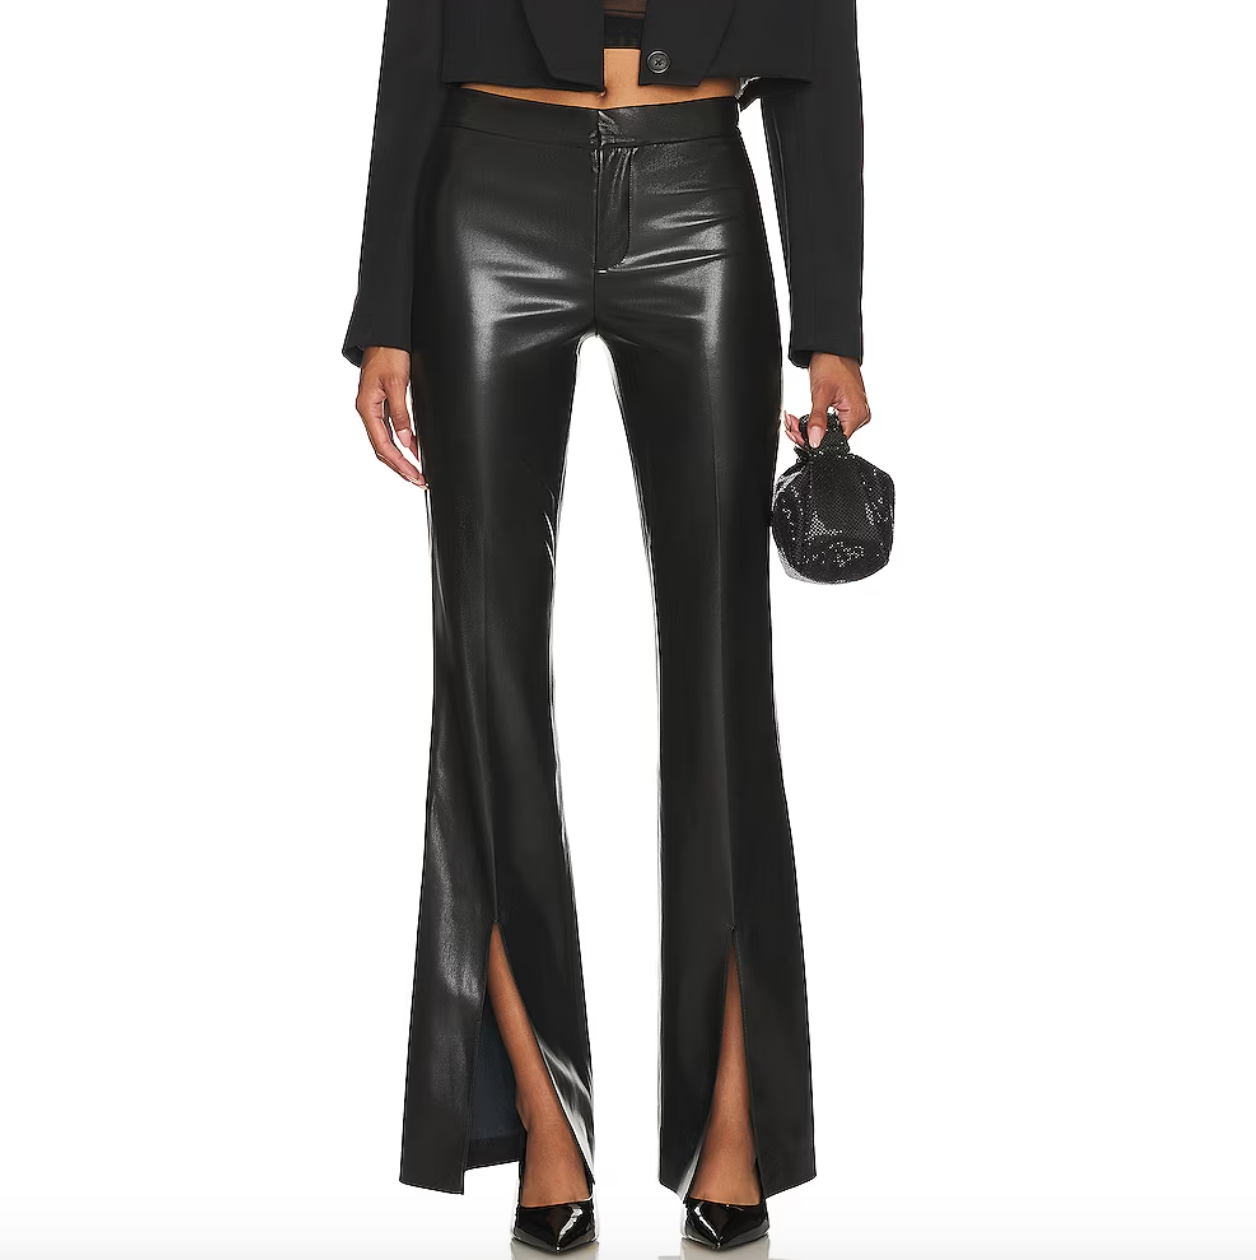 FAUX LEATHER SLIM FLARE TROUSERS WITH SLITS - Black